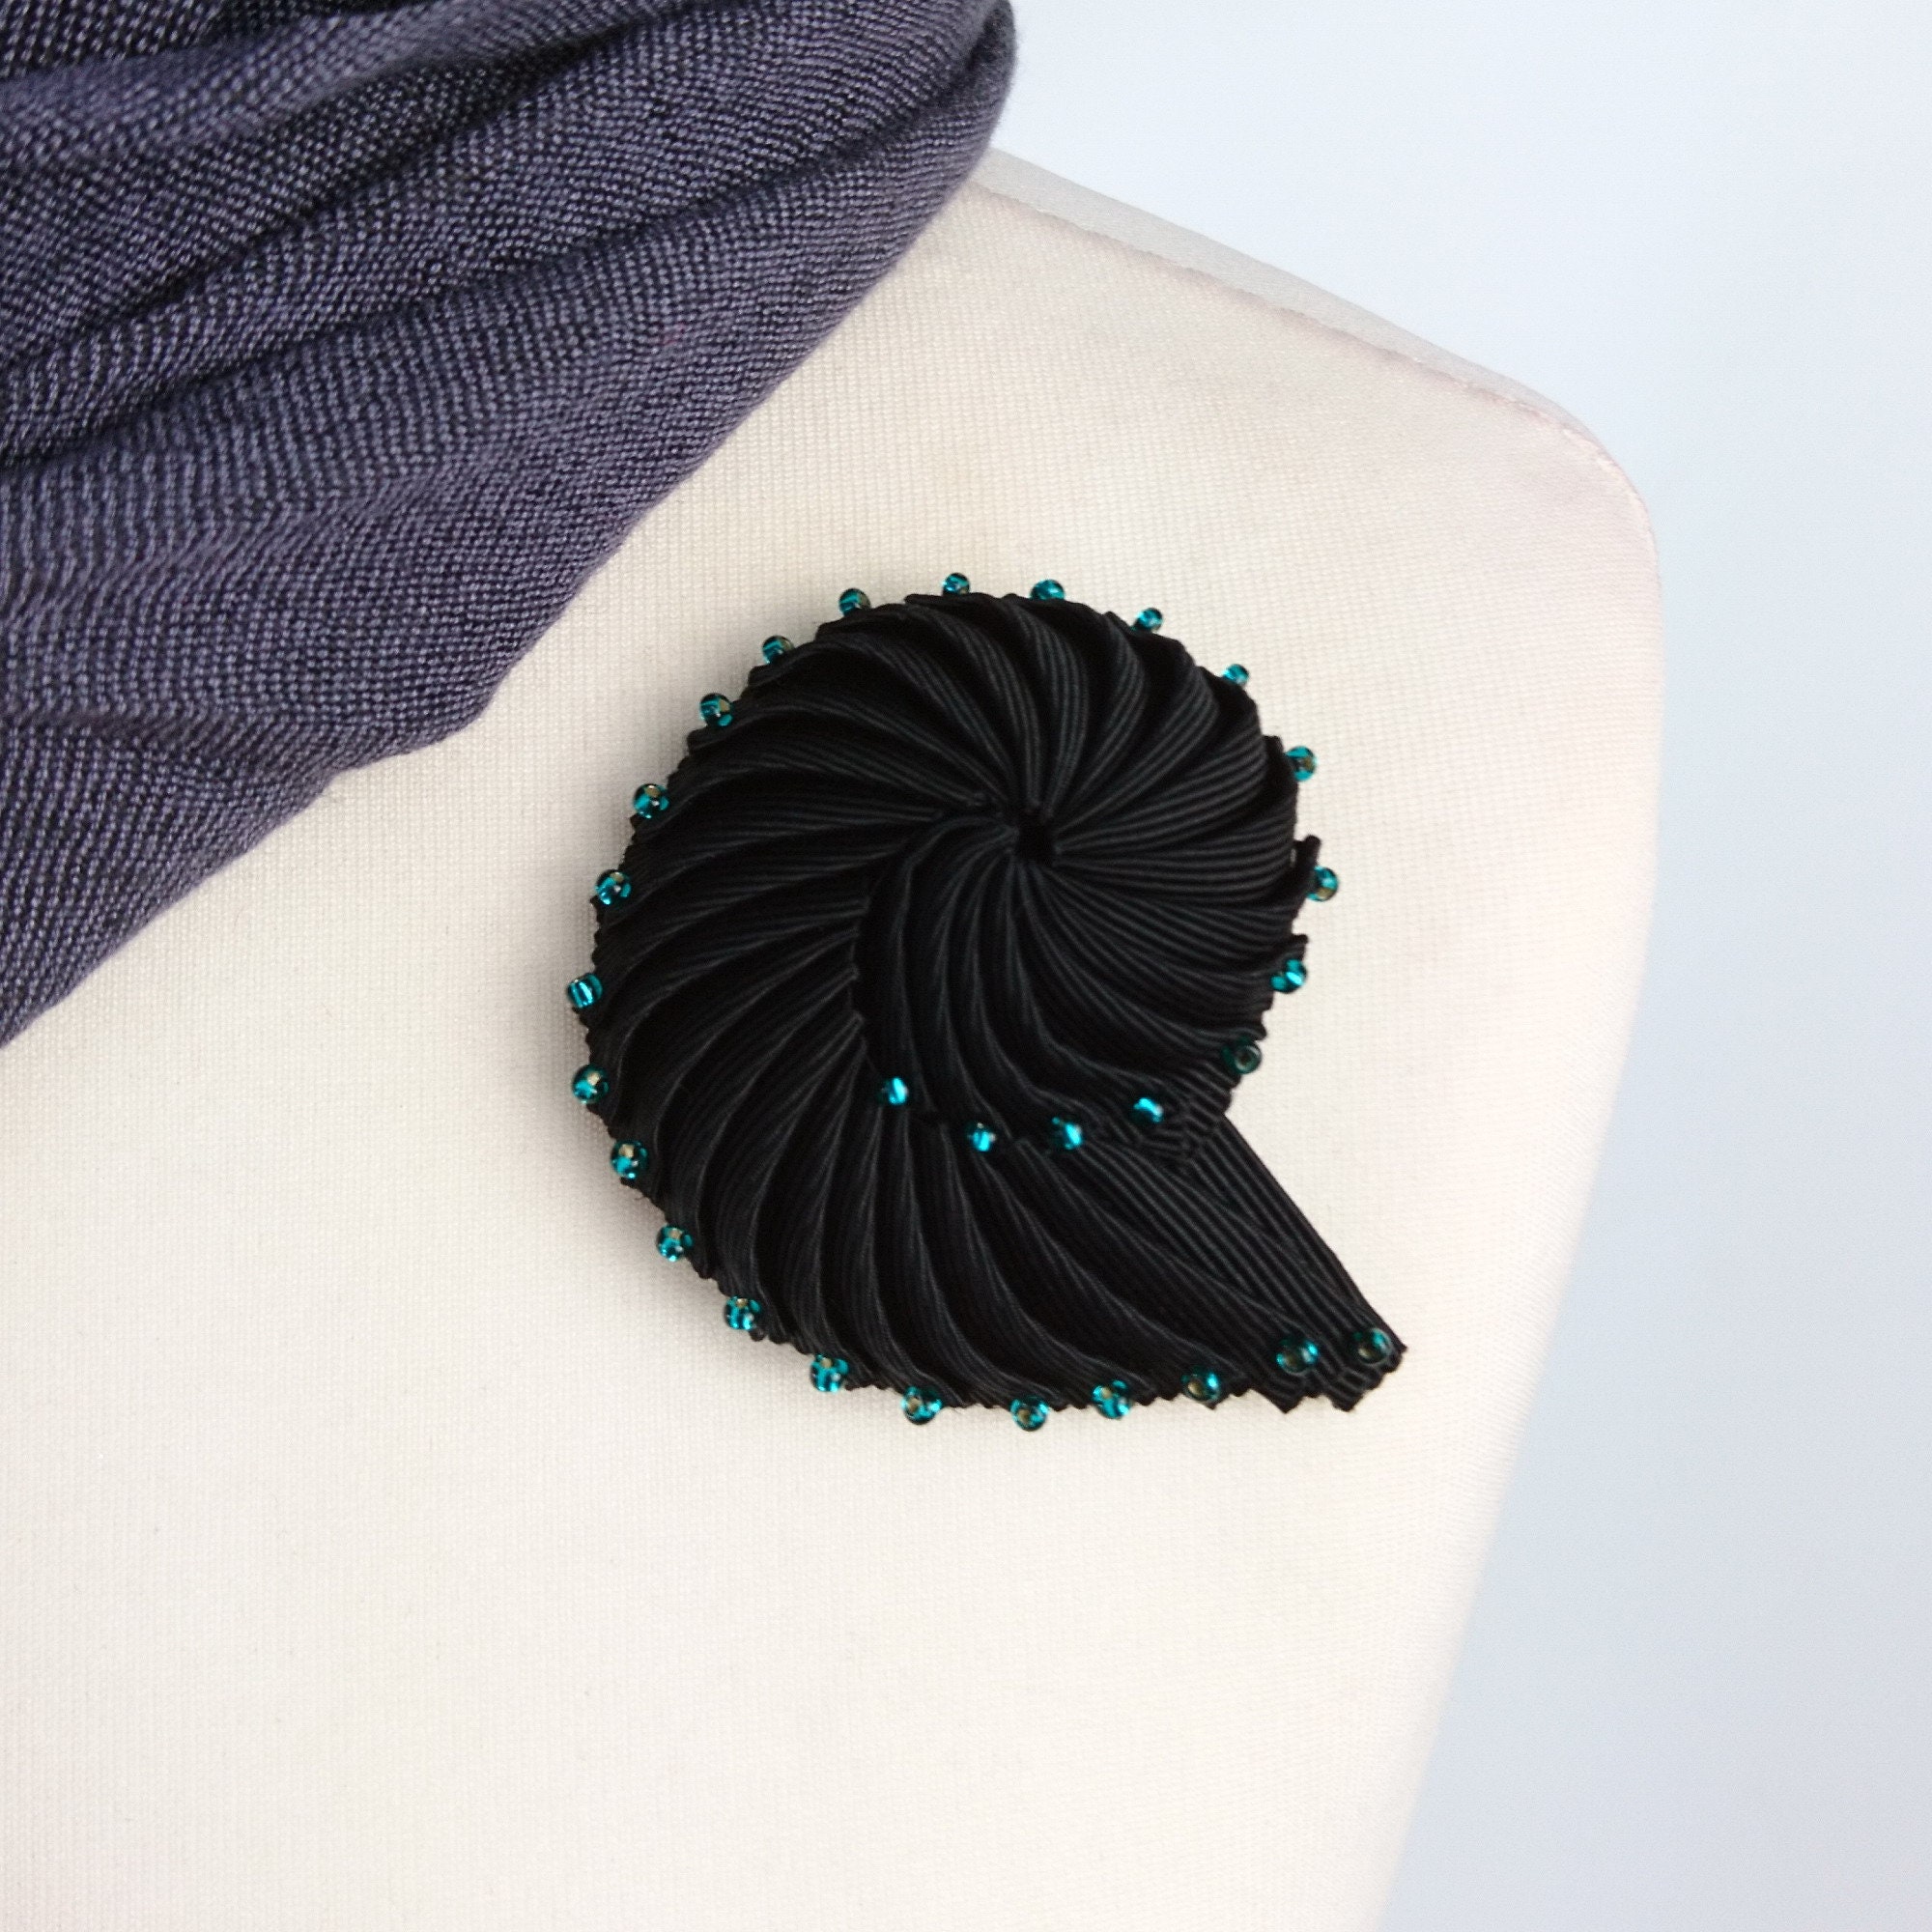 Black Ribbon Nautilus Shell Brooch With Turquoise Glass Seed Beads, Brooch, Seashell Textile Art Millinery